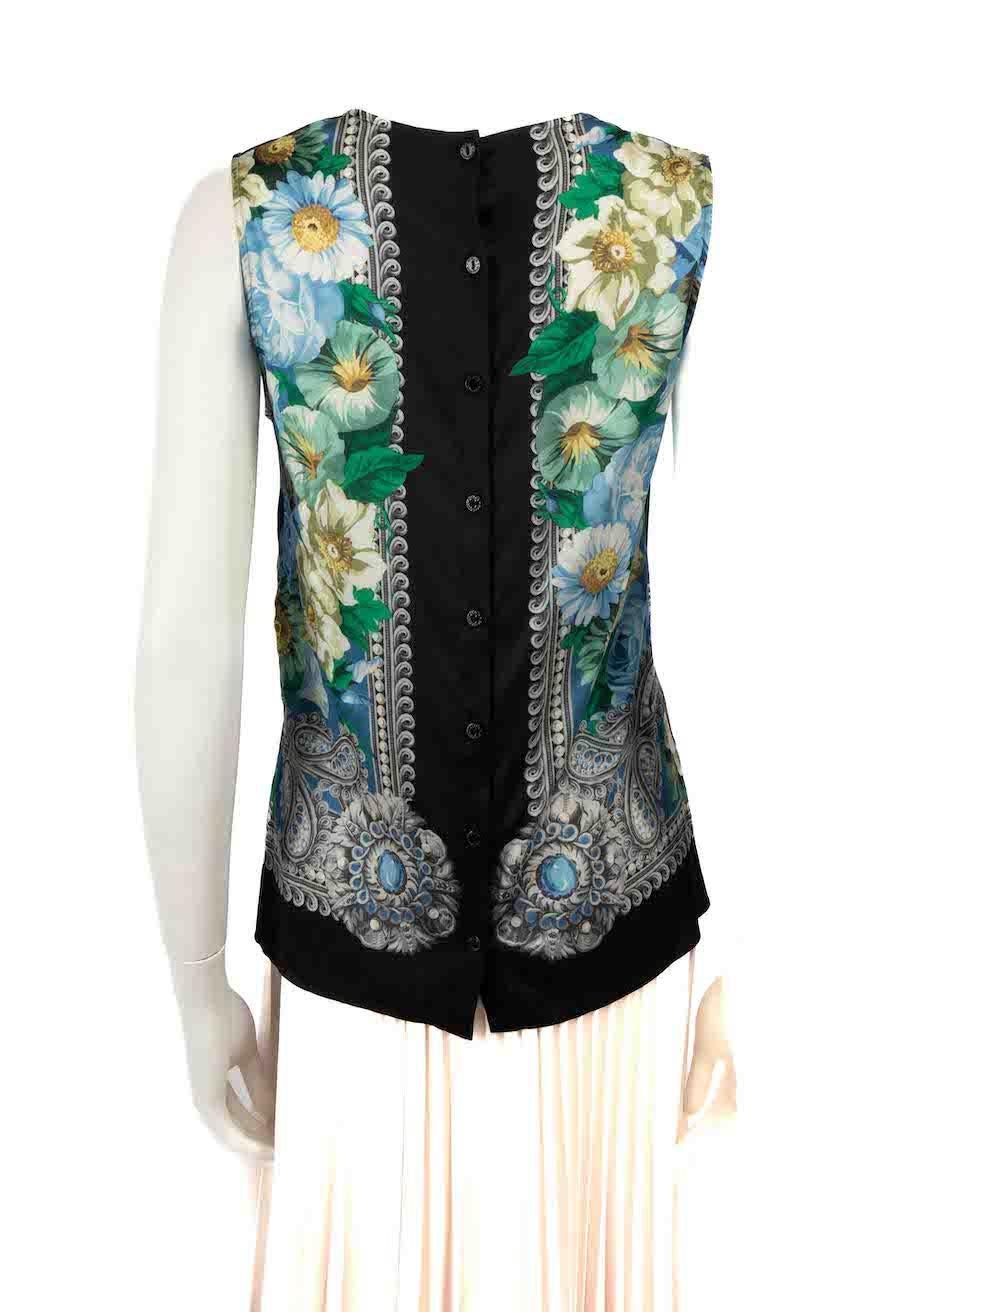 Dolce & Gabbana Floral Printed Sleeveless Top Size S In New Condition For Sale In London, GB